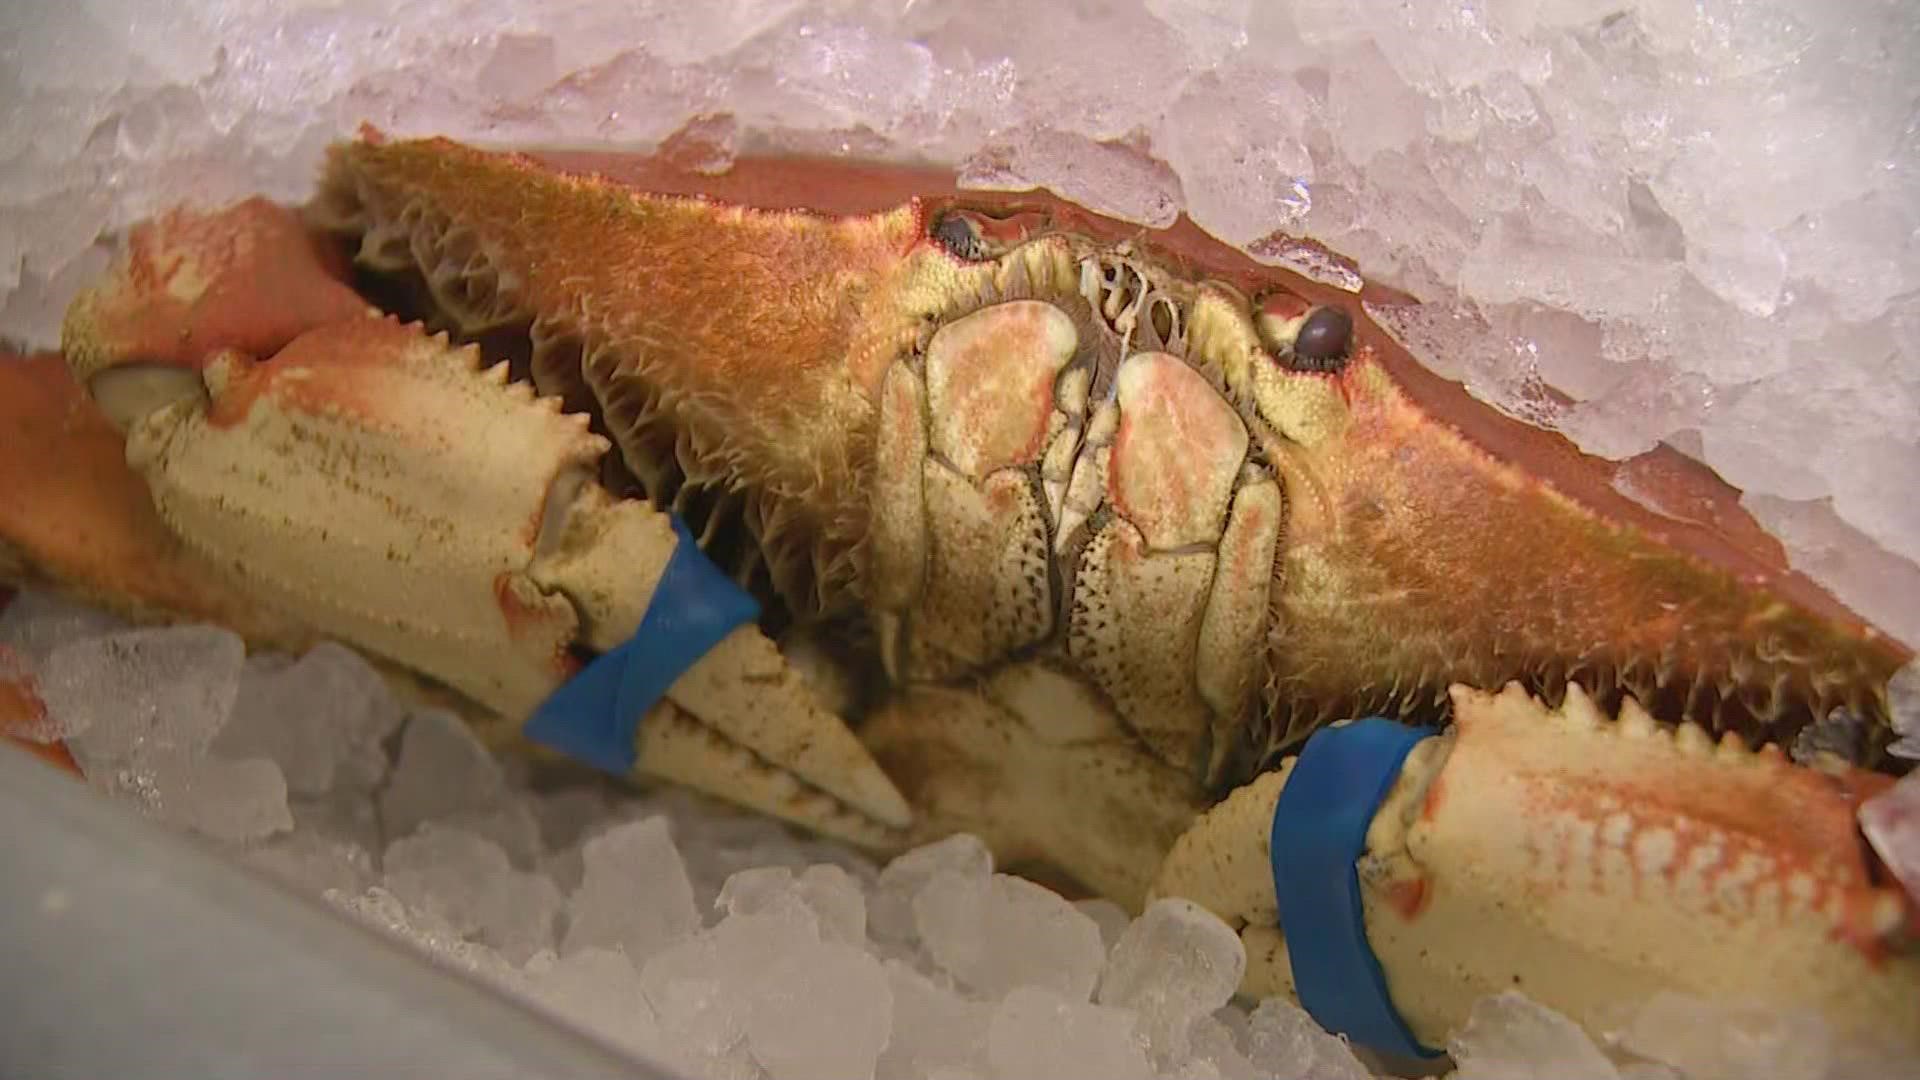 For the first time in US history, the Bering Sea Snow Crab harvest is closed and for the second consecutive year, so is the Bristol Bay Red King Crab harvest.